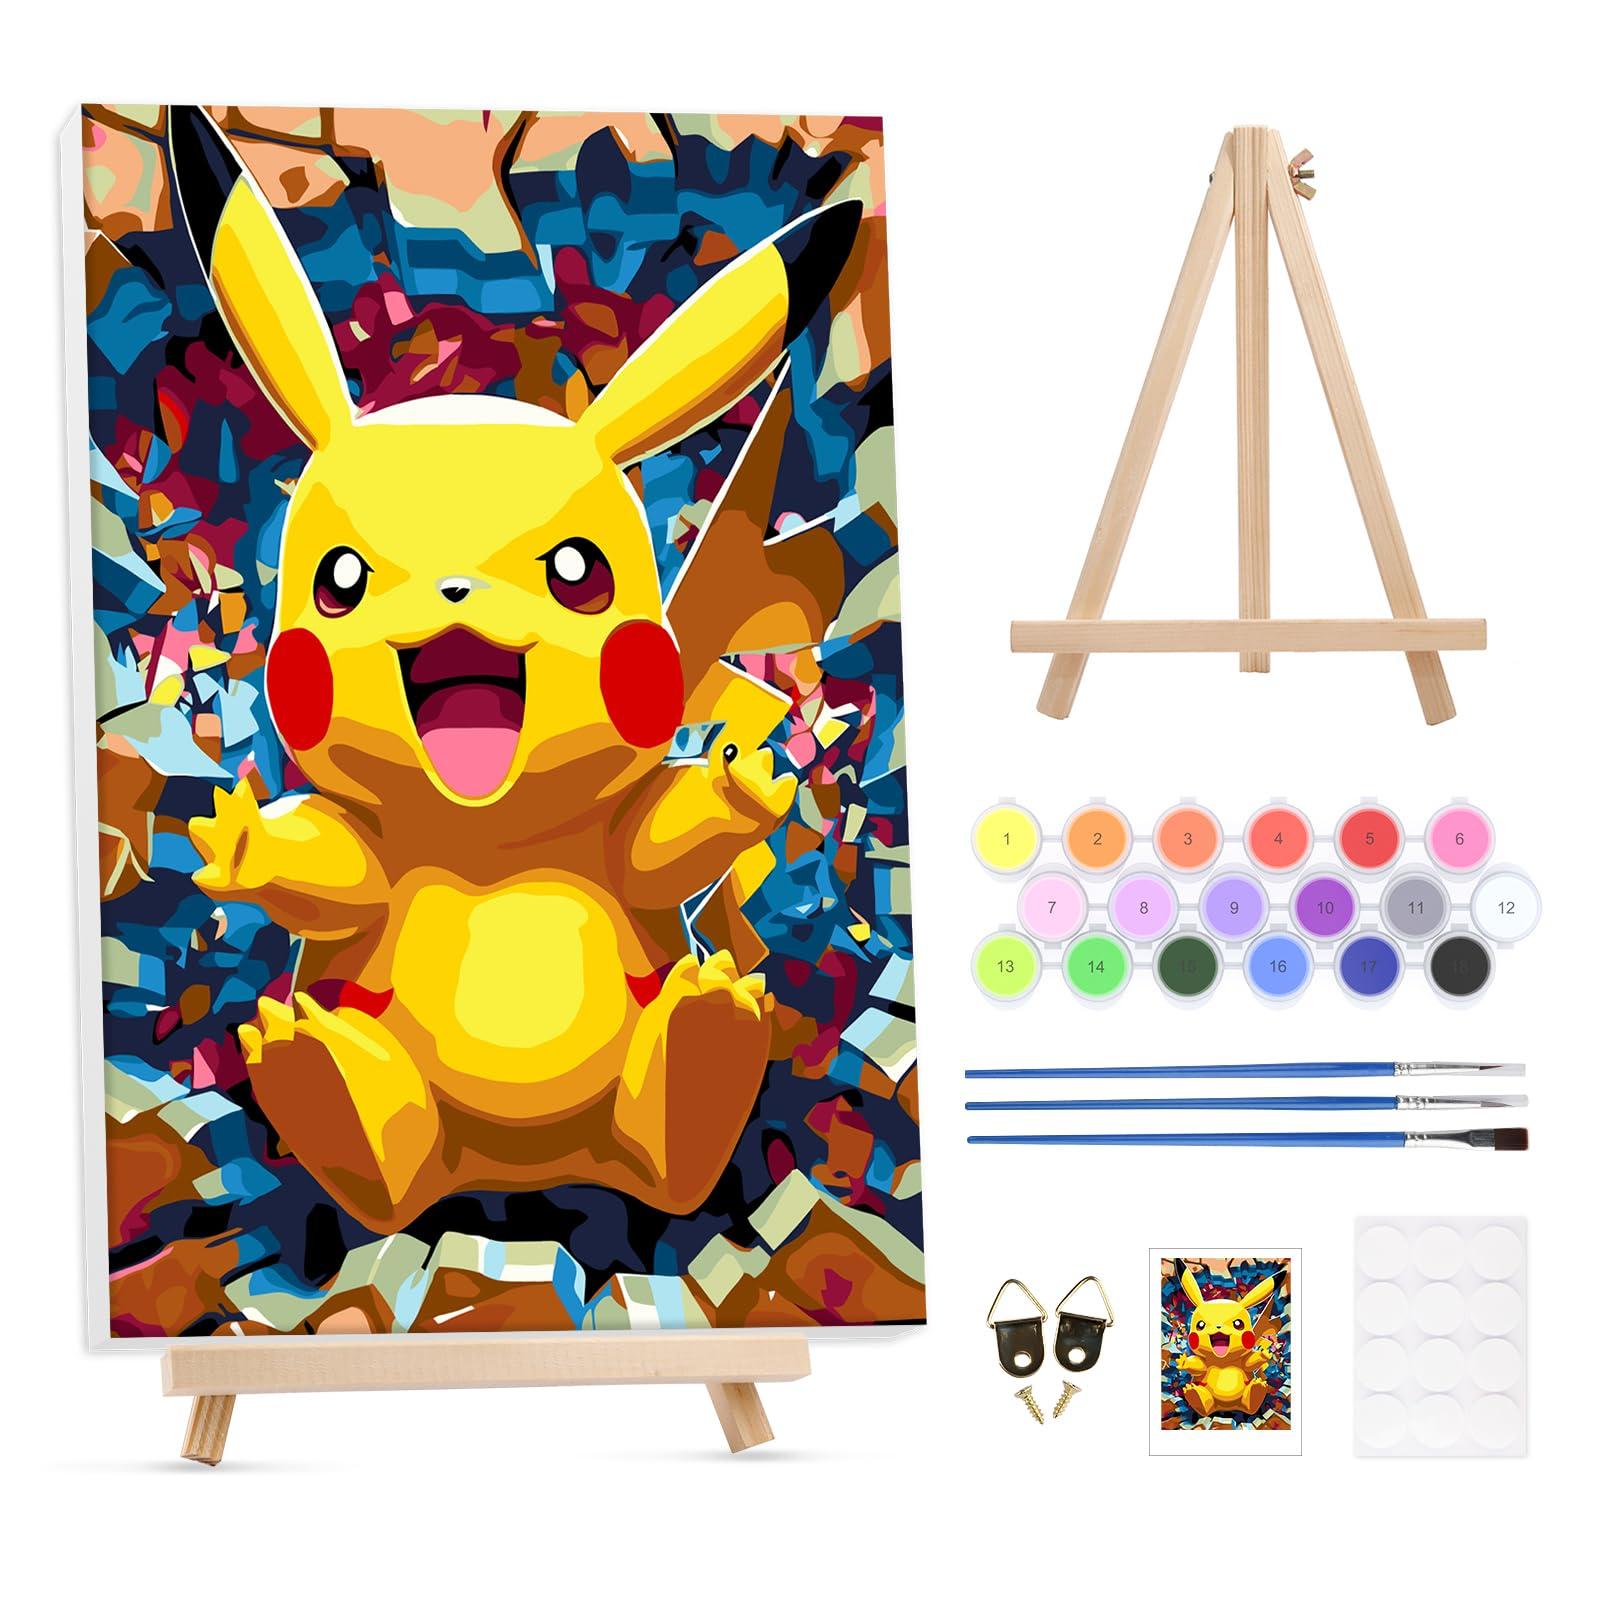 GHHKUD Paint by Number Kits for Adult with Wooden Easel, Oil Acrylic Painting by Numbers Kit for Adults Beginners on Framed Canvas, Cartoon Anime Arts and Crafts for Home Wall Decor-12x16inch